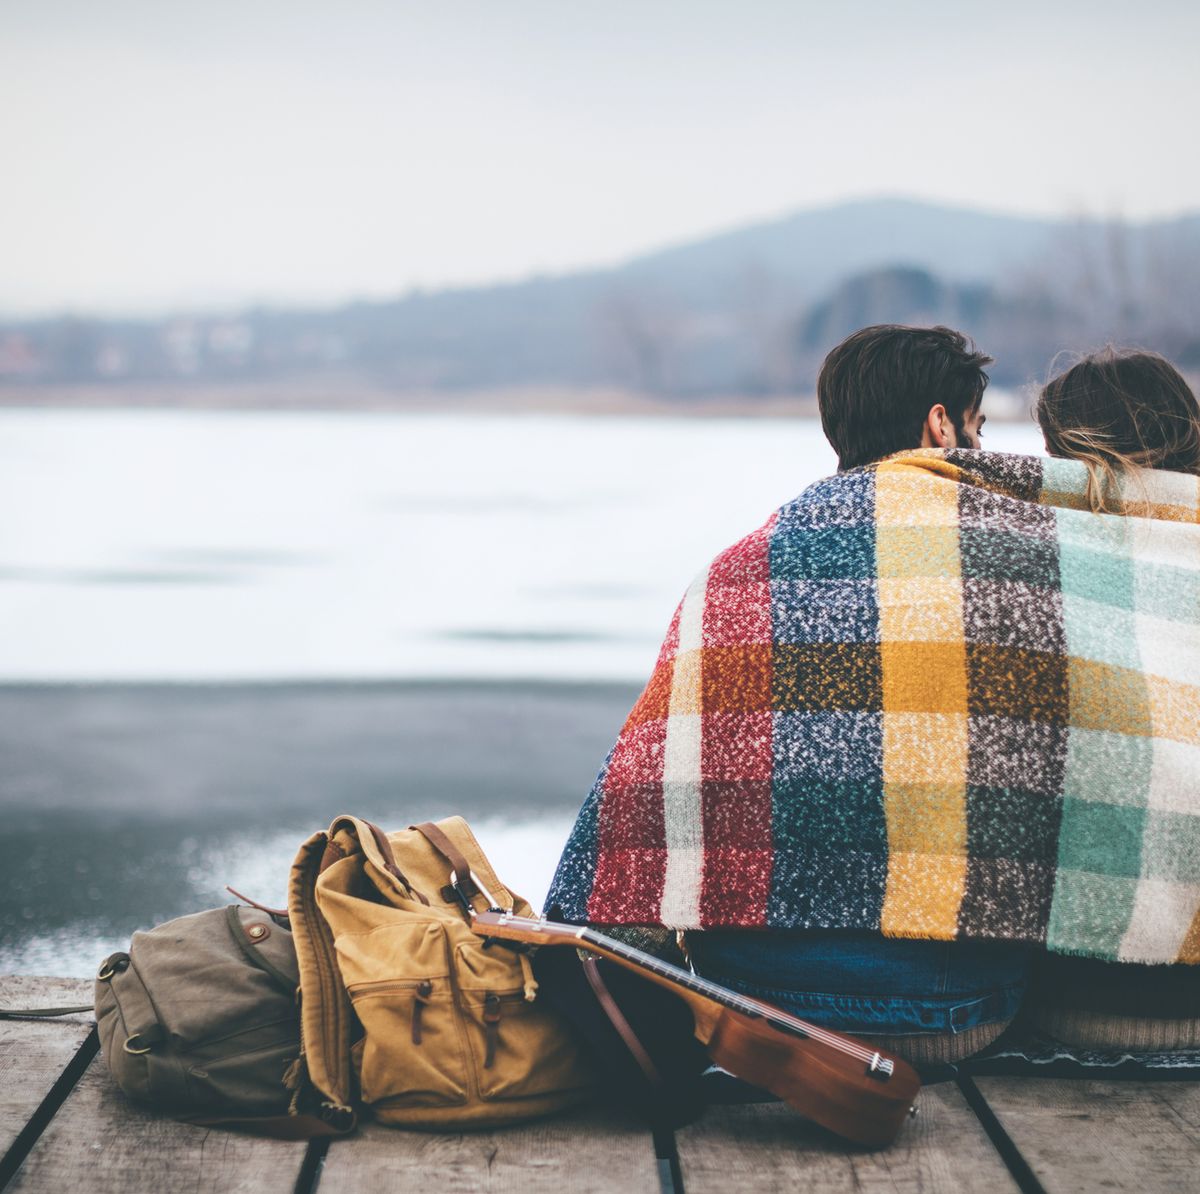 7 Ridiculously Cute Winter Date Ideas for You and Your Boo